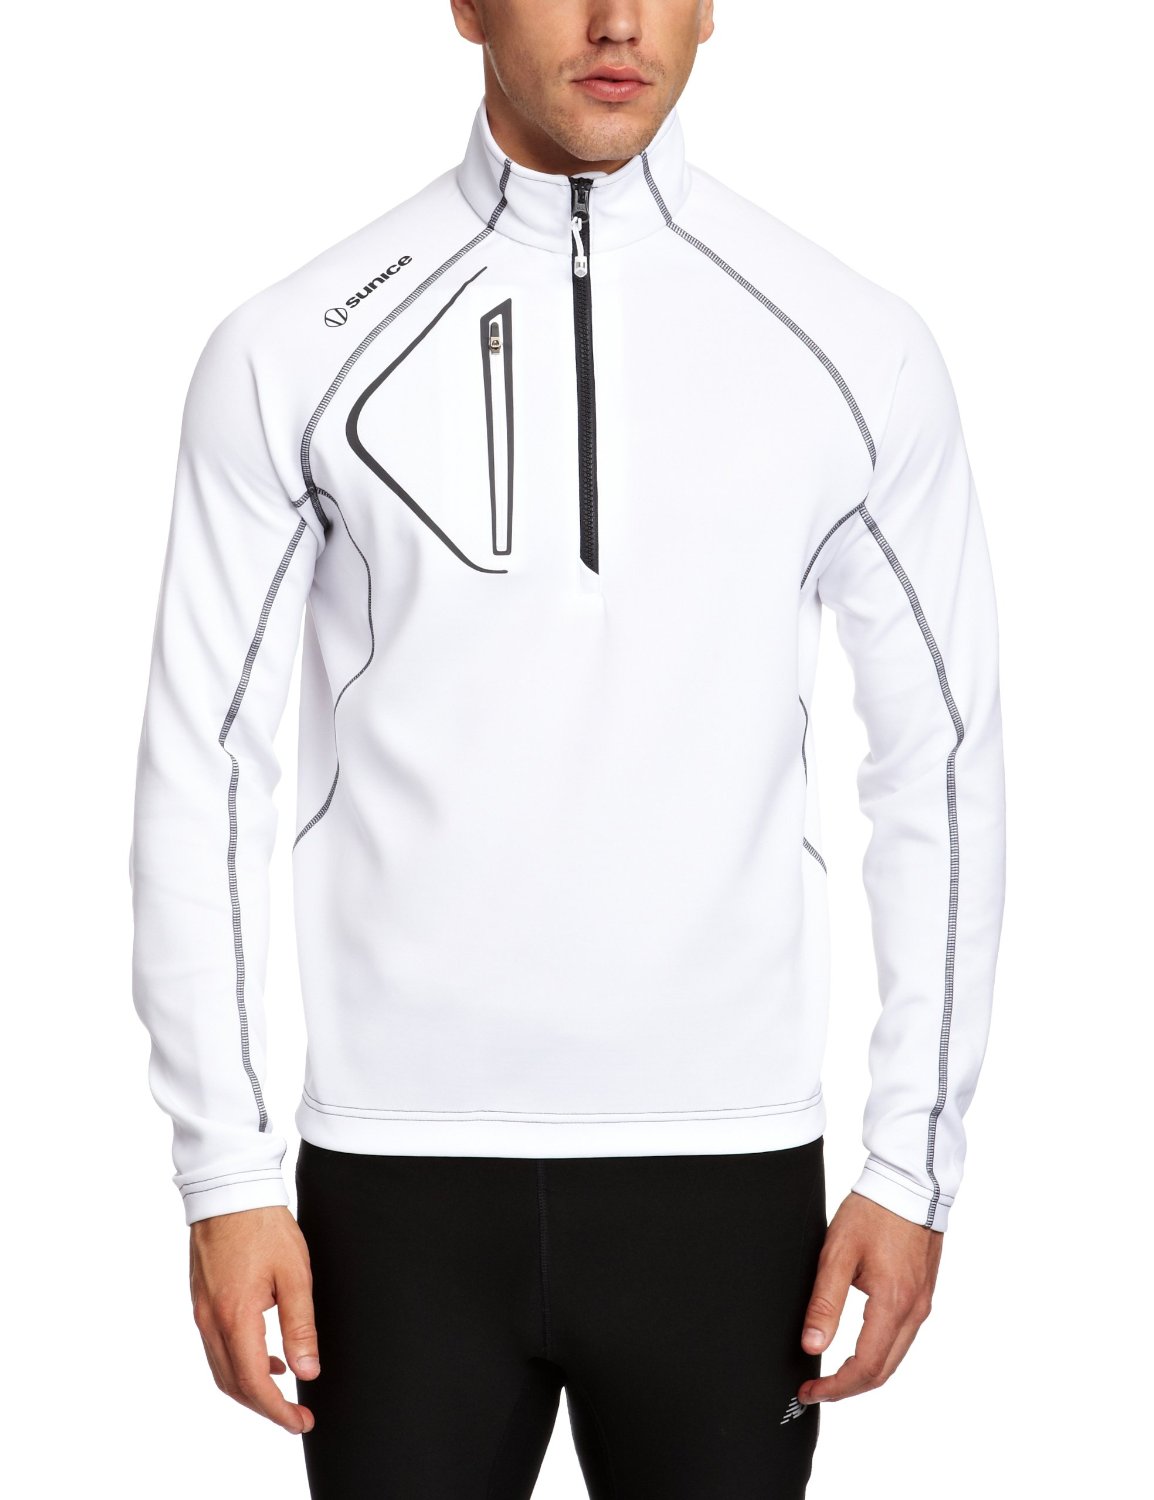 Mens Sunice Allendale Thermal Layer Golf Jackets